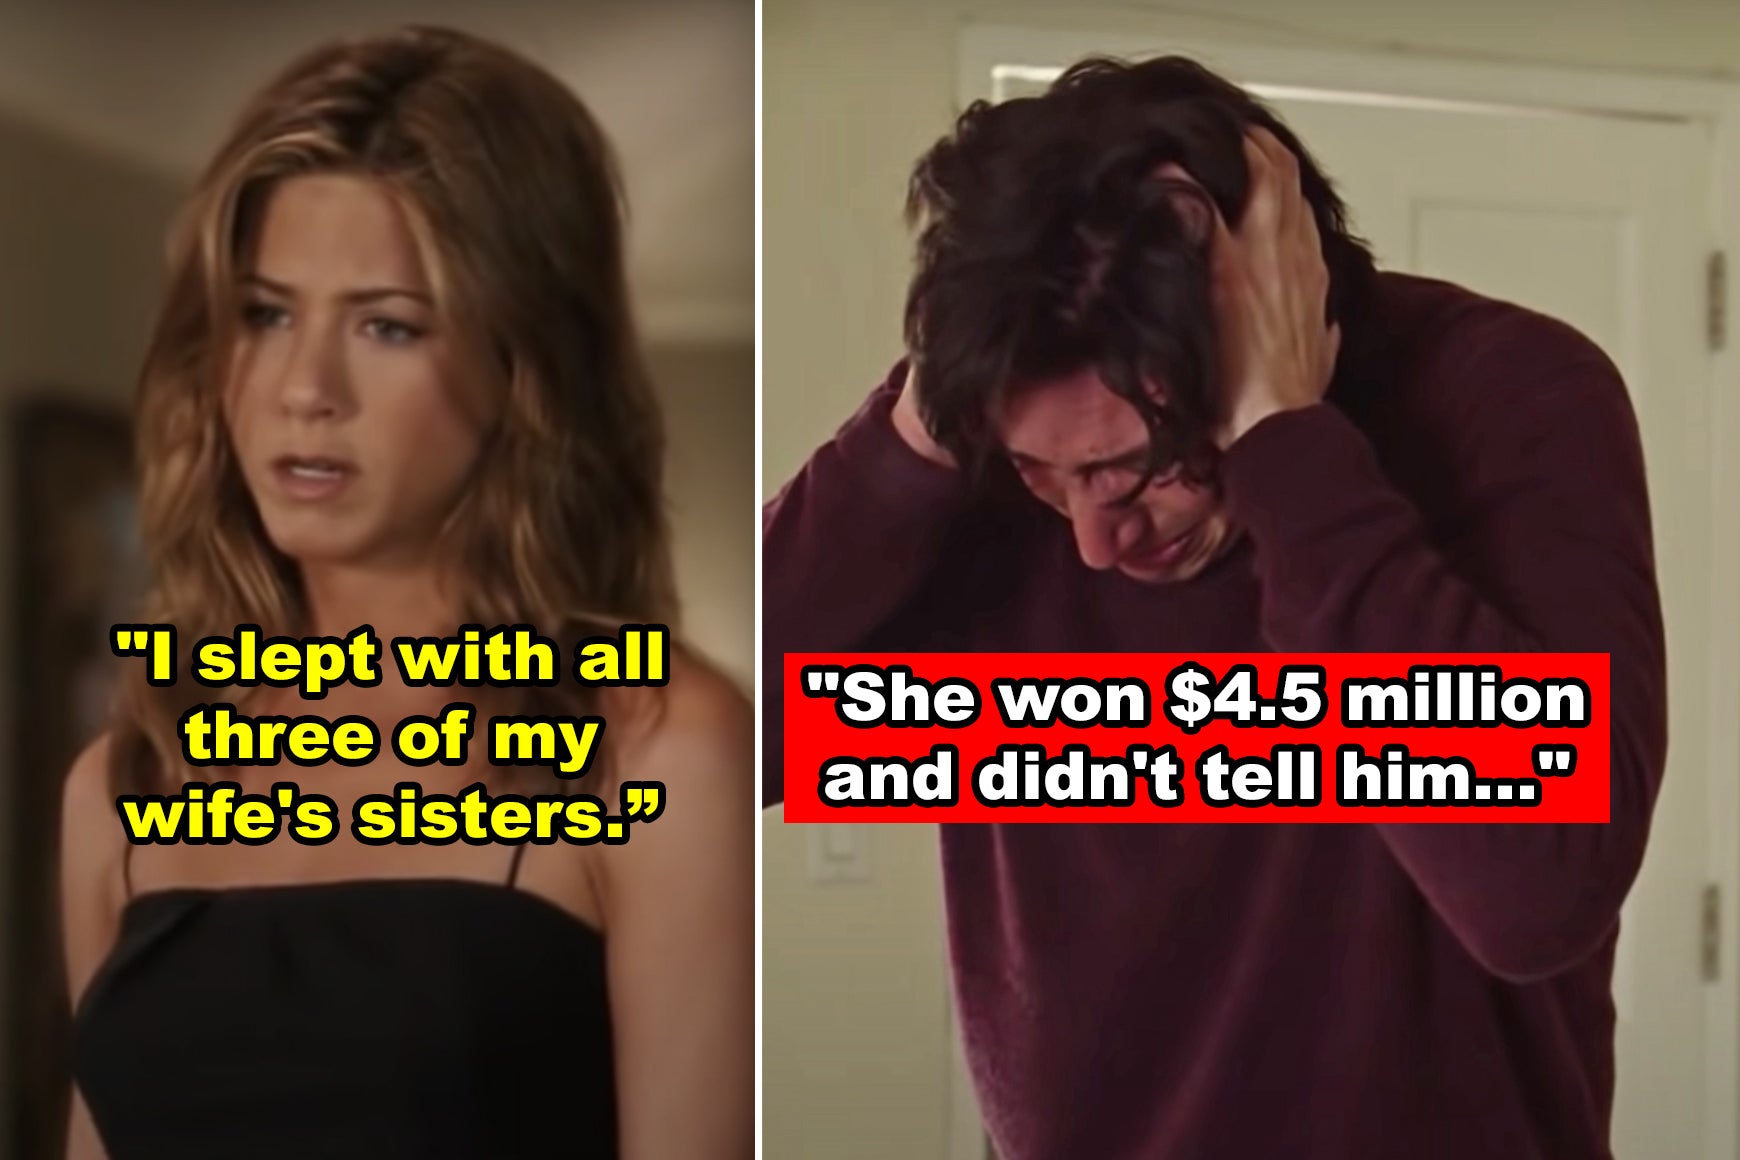 36 Wild Secrets People Are Keeping From Their Spouses That "Could Absolutely Ruin" Their Marriage